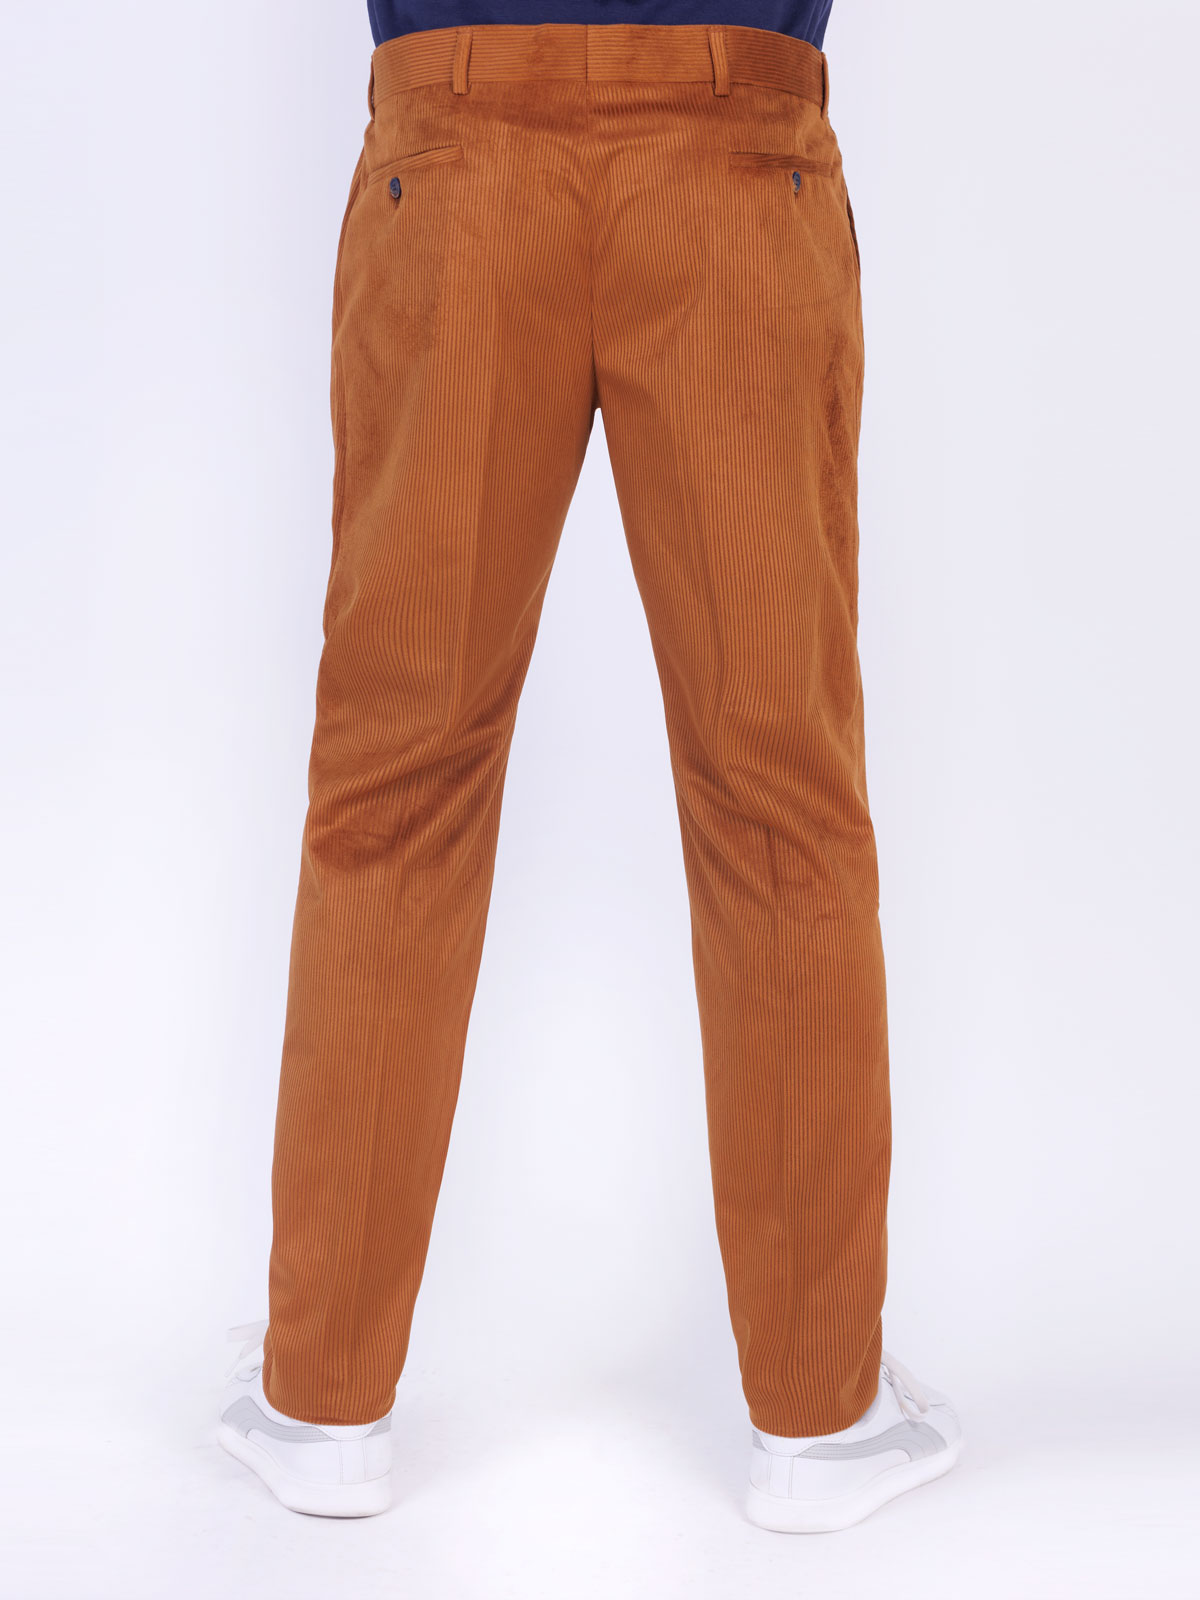 Mustard colored trousers for men - 60299 € 44.43 img2